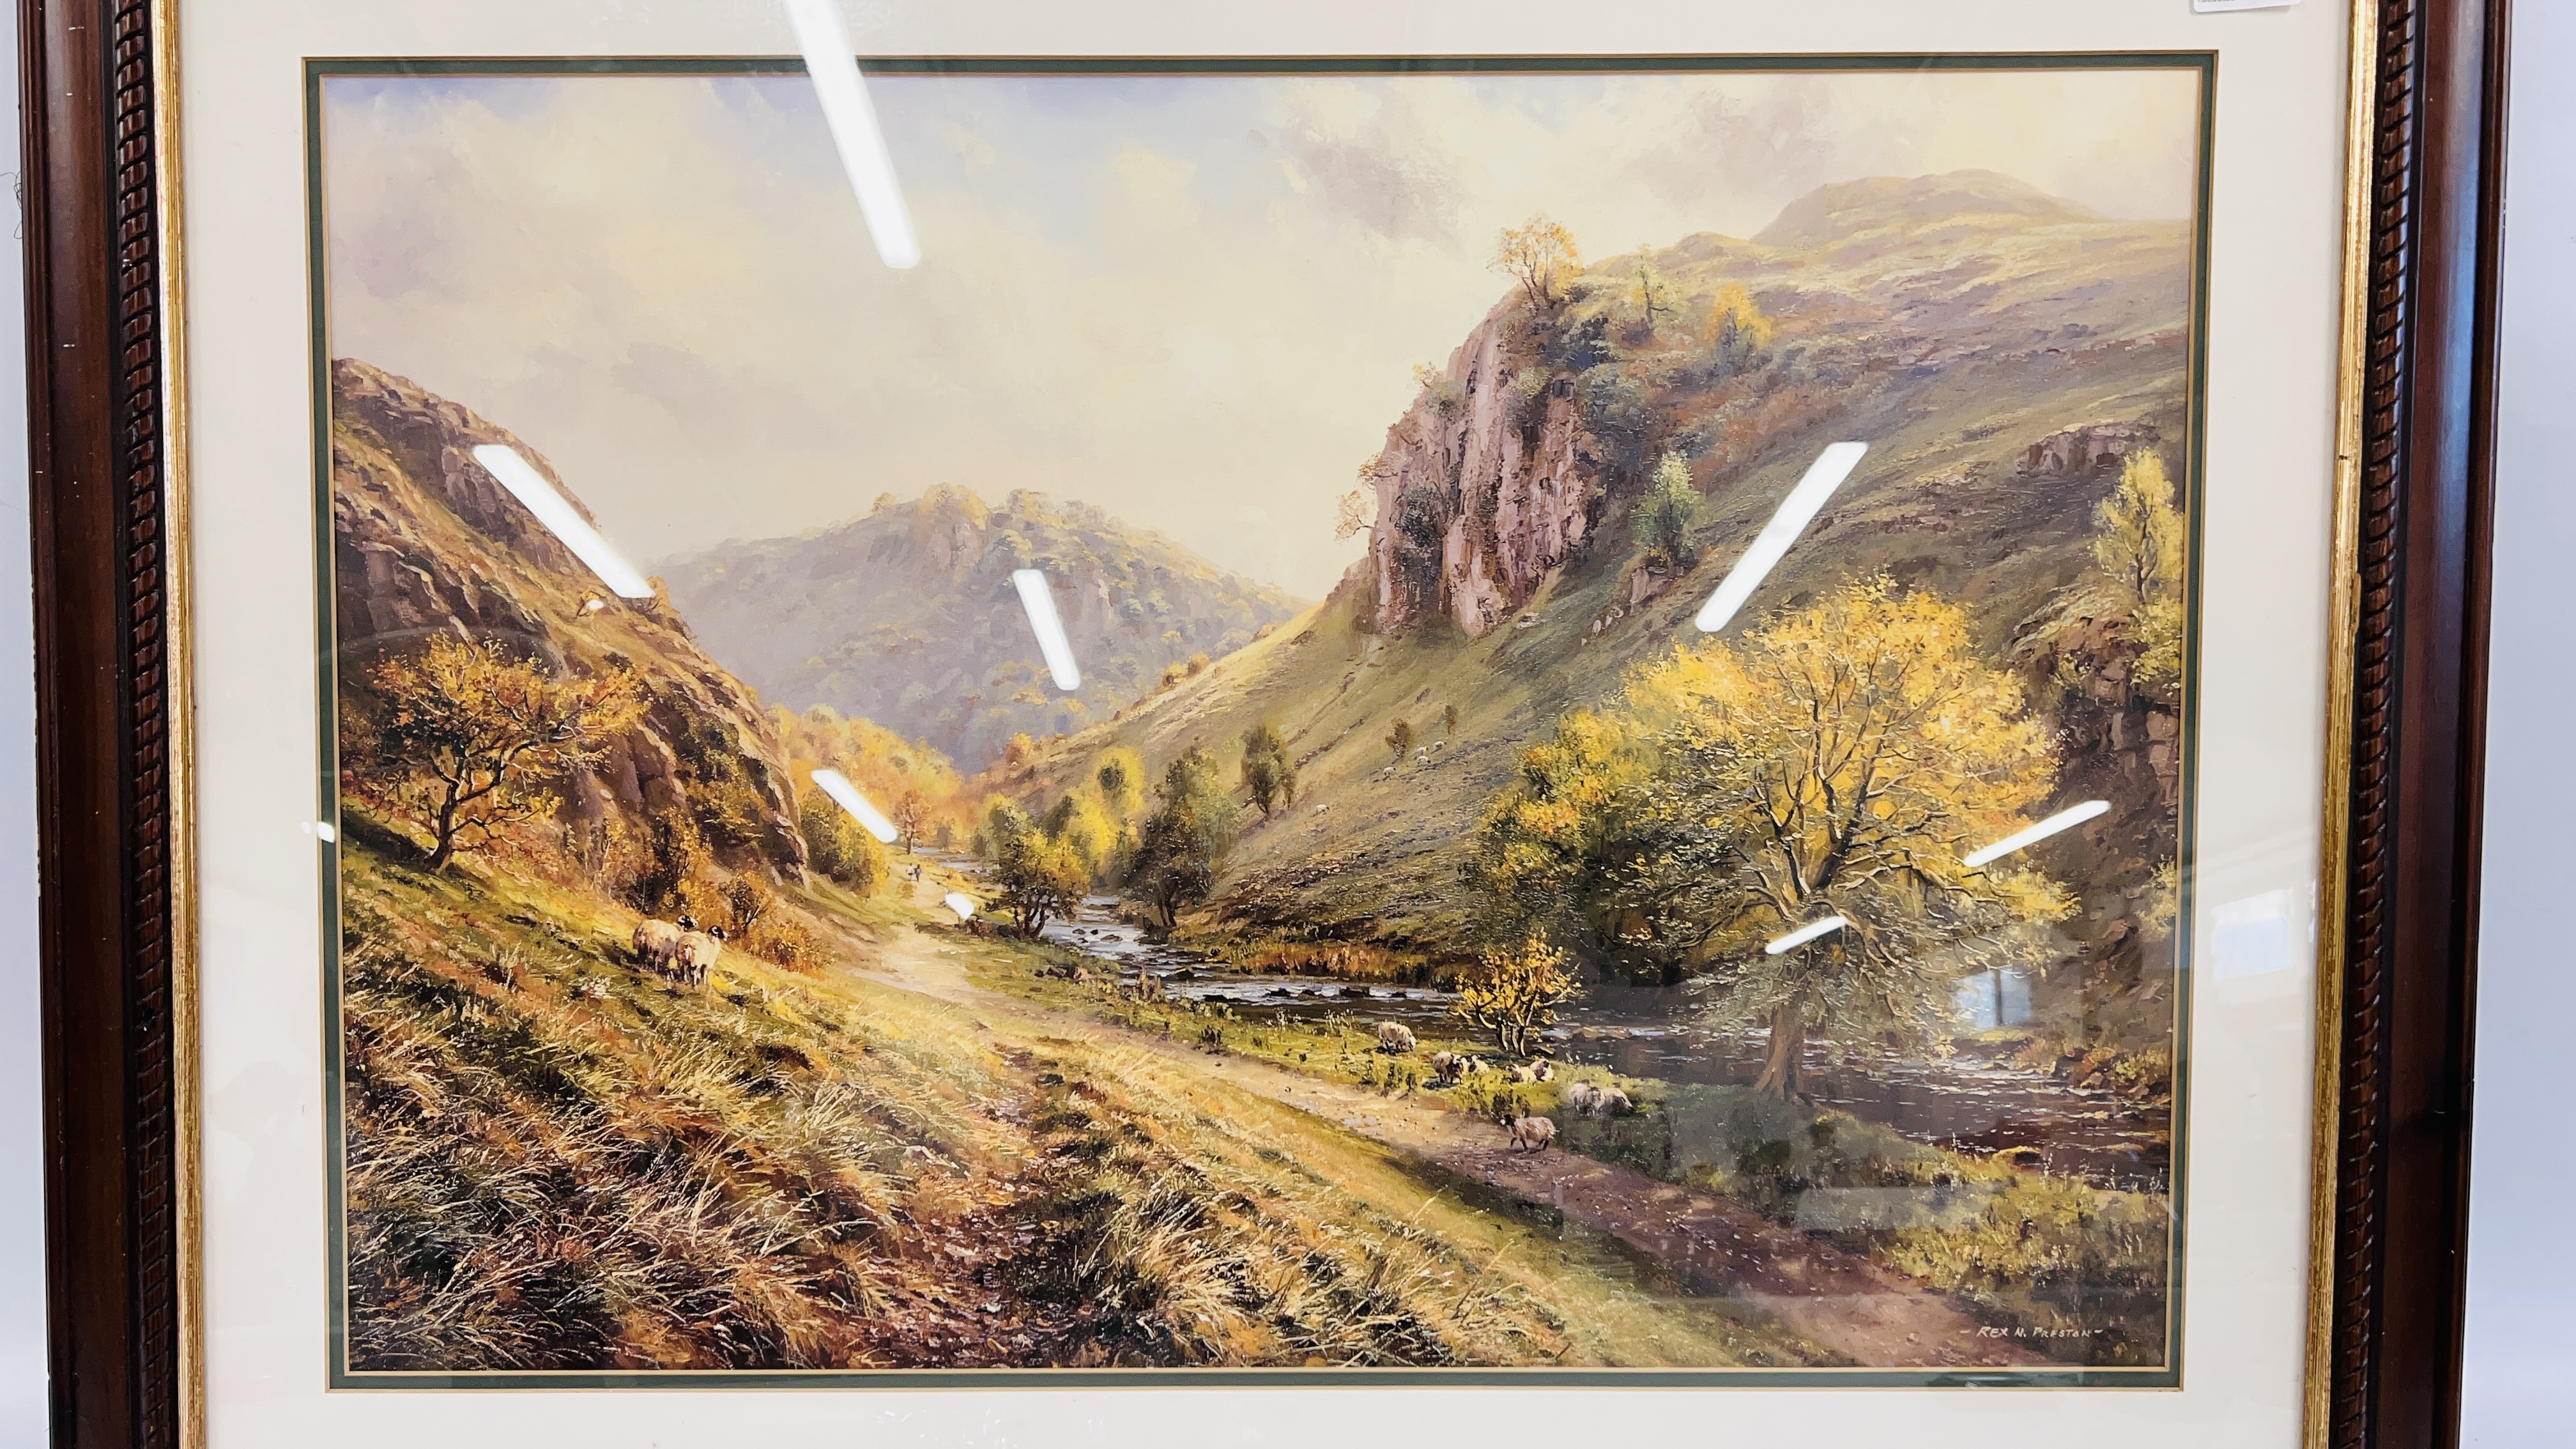 A FRAMED PRINT OF A MOUNTAIN SCENE WITH SHEEP BY REX. N. PRESTON, W 70CM X H 50CM. - Image 2 of 2